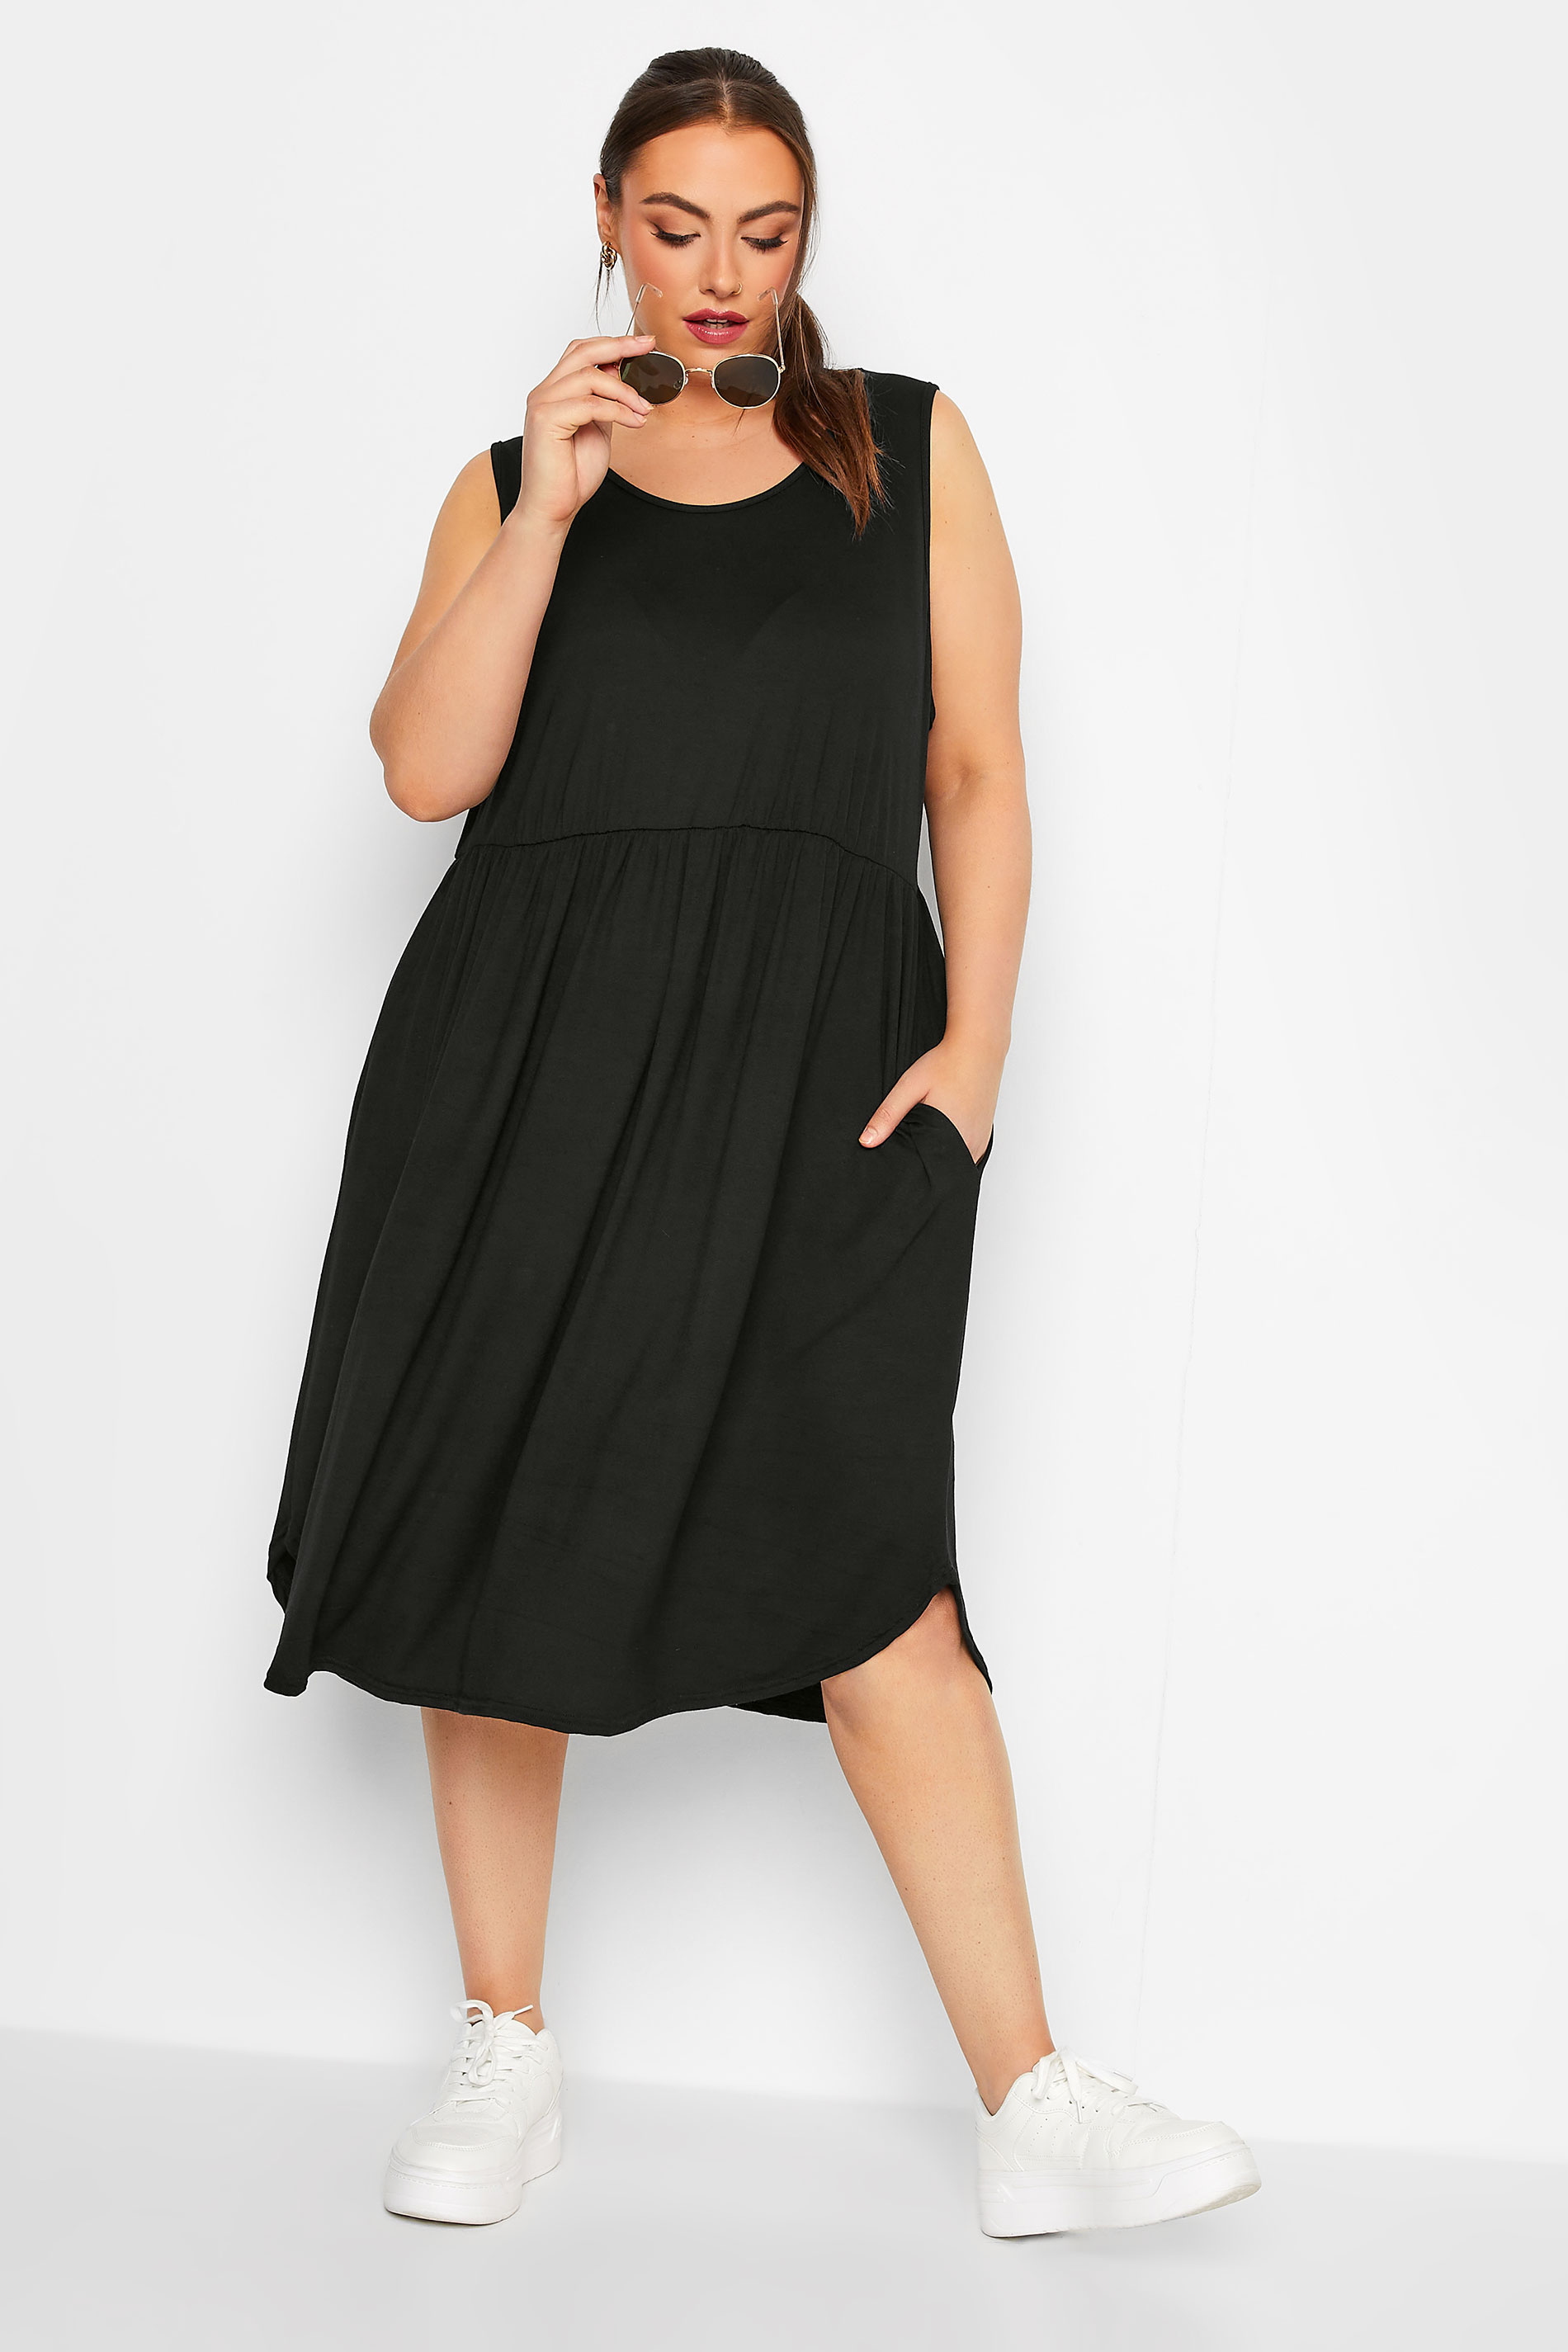 LIMITED COLLECTION Plus Size Black Pocket Tunic Dress | Yours Clothing 1